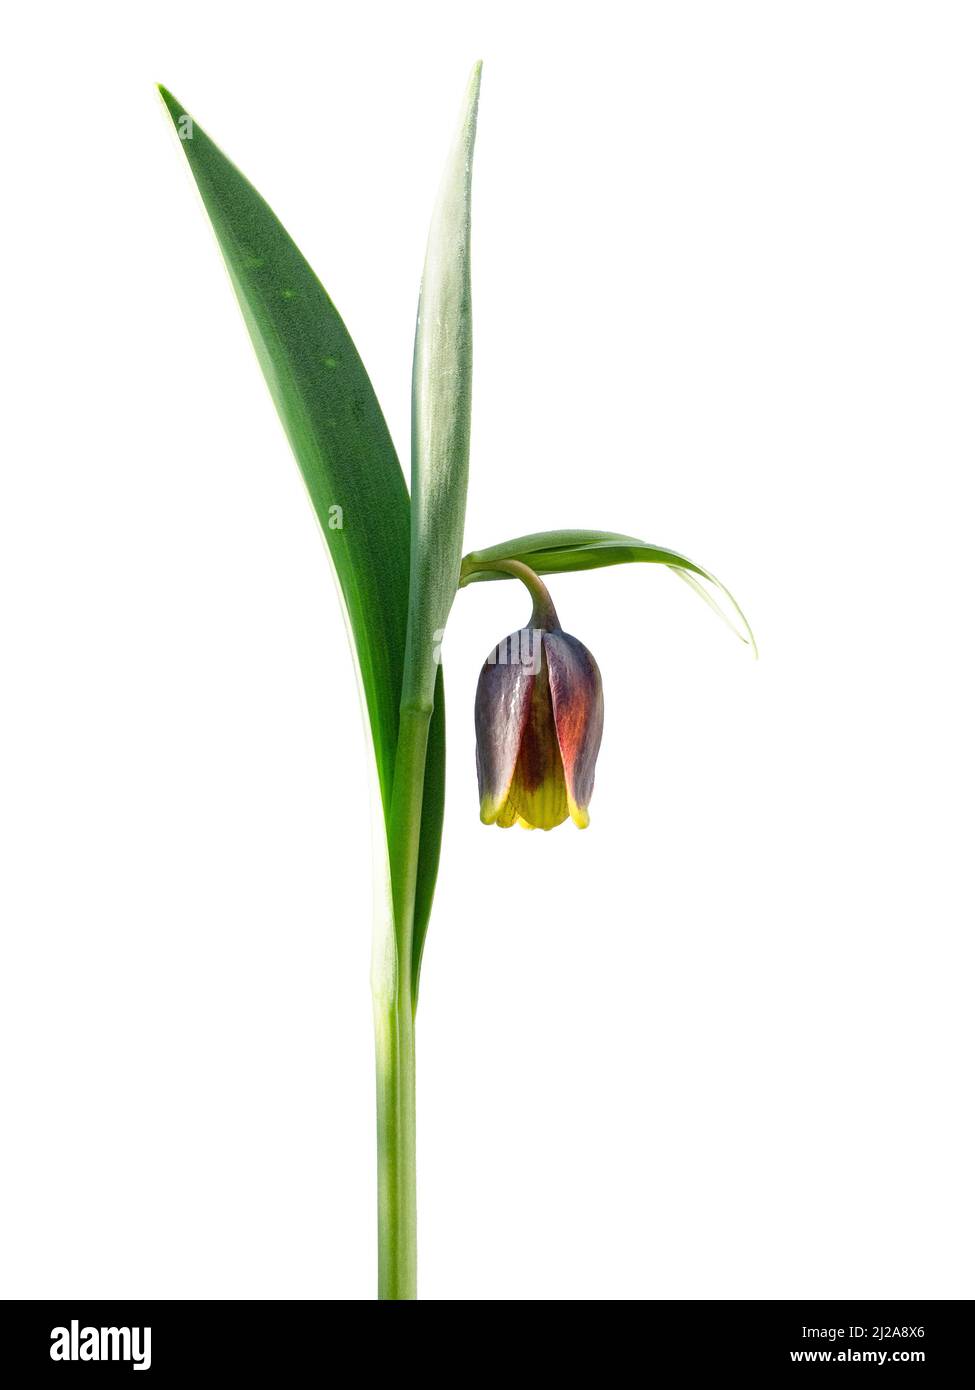 A close up of a single mahogany and yellow bell shaped flower of Fritillaria uva-vulpis against a clear white background Stock Photo